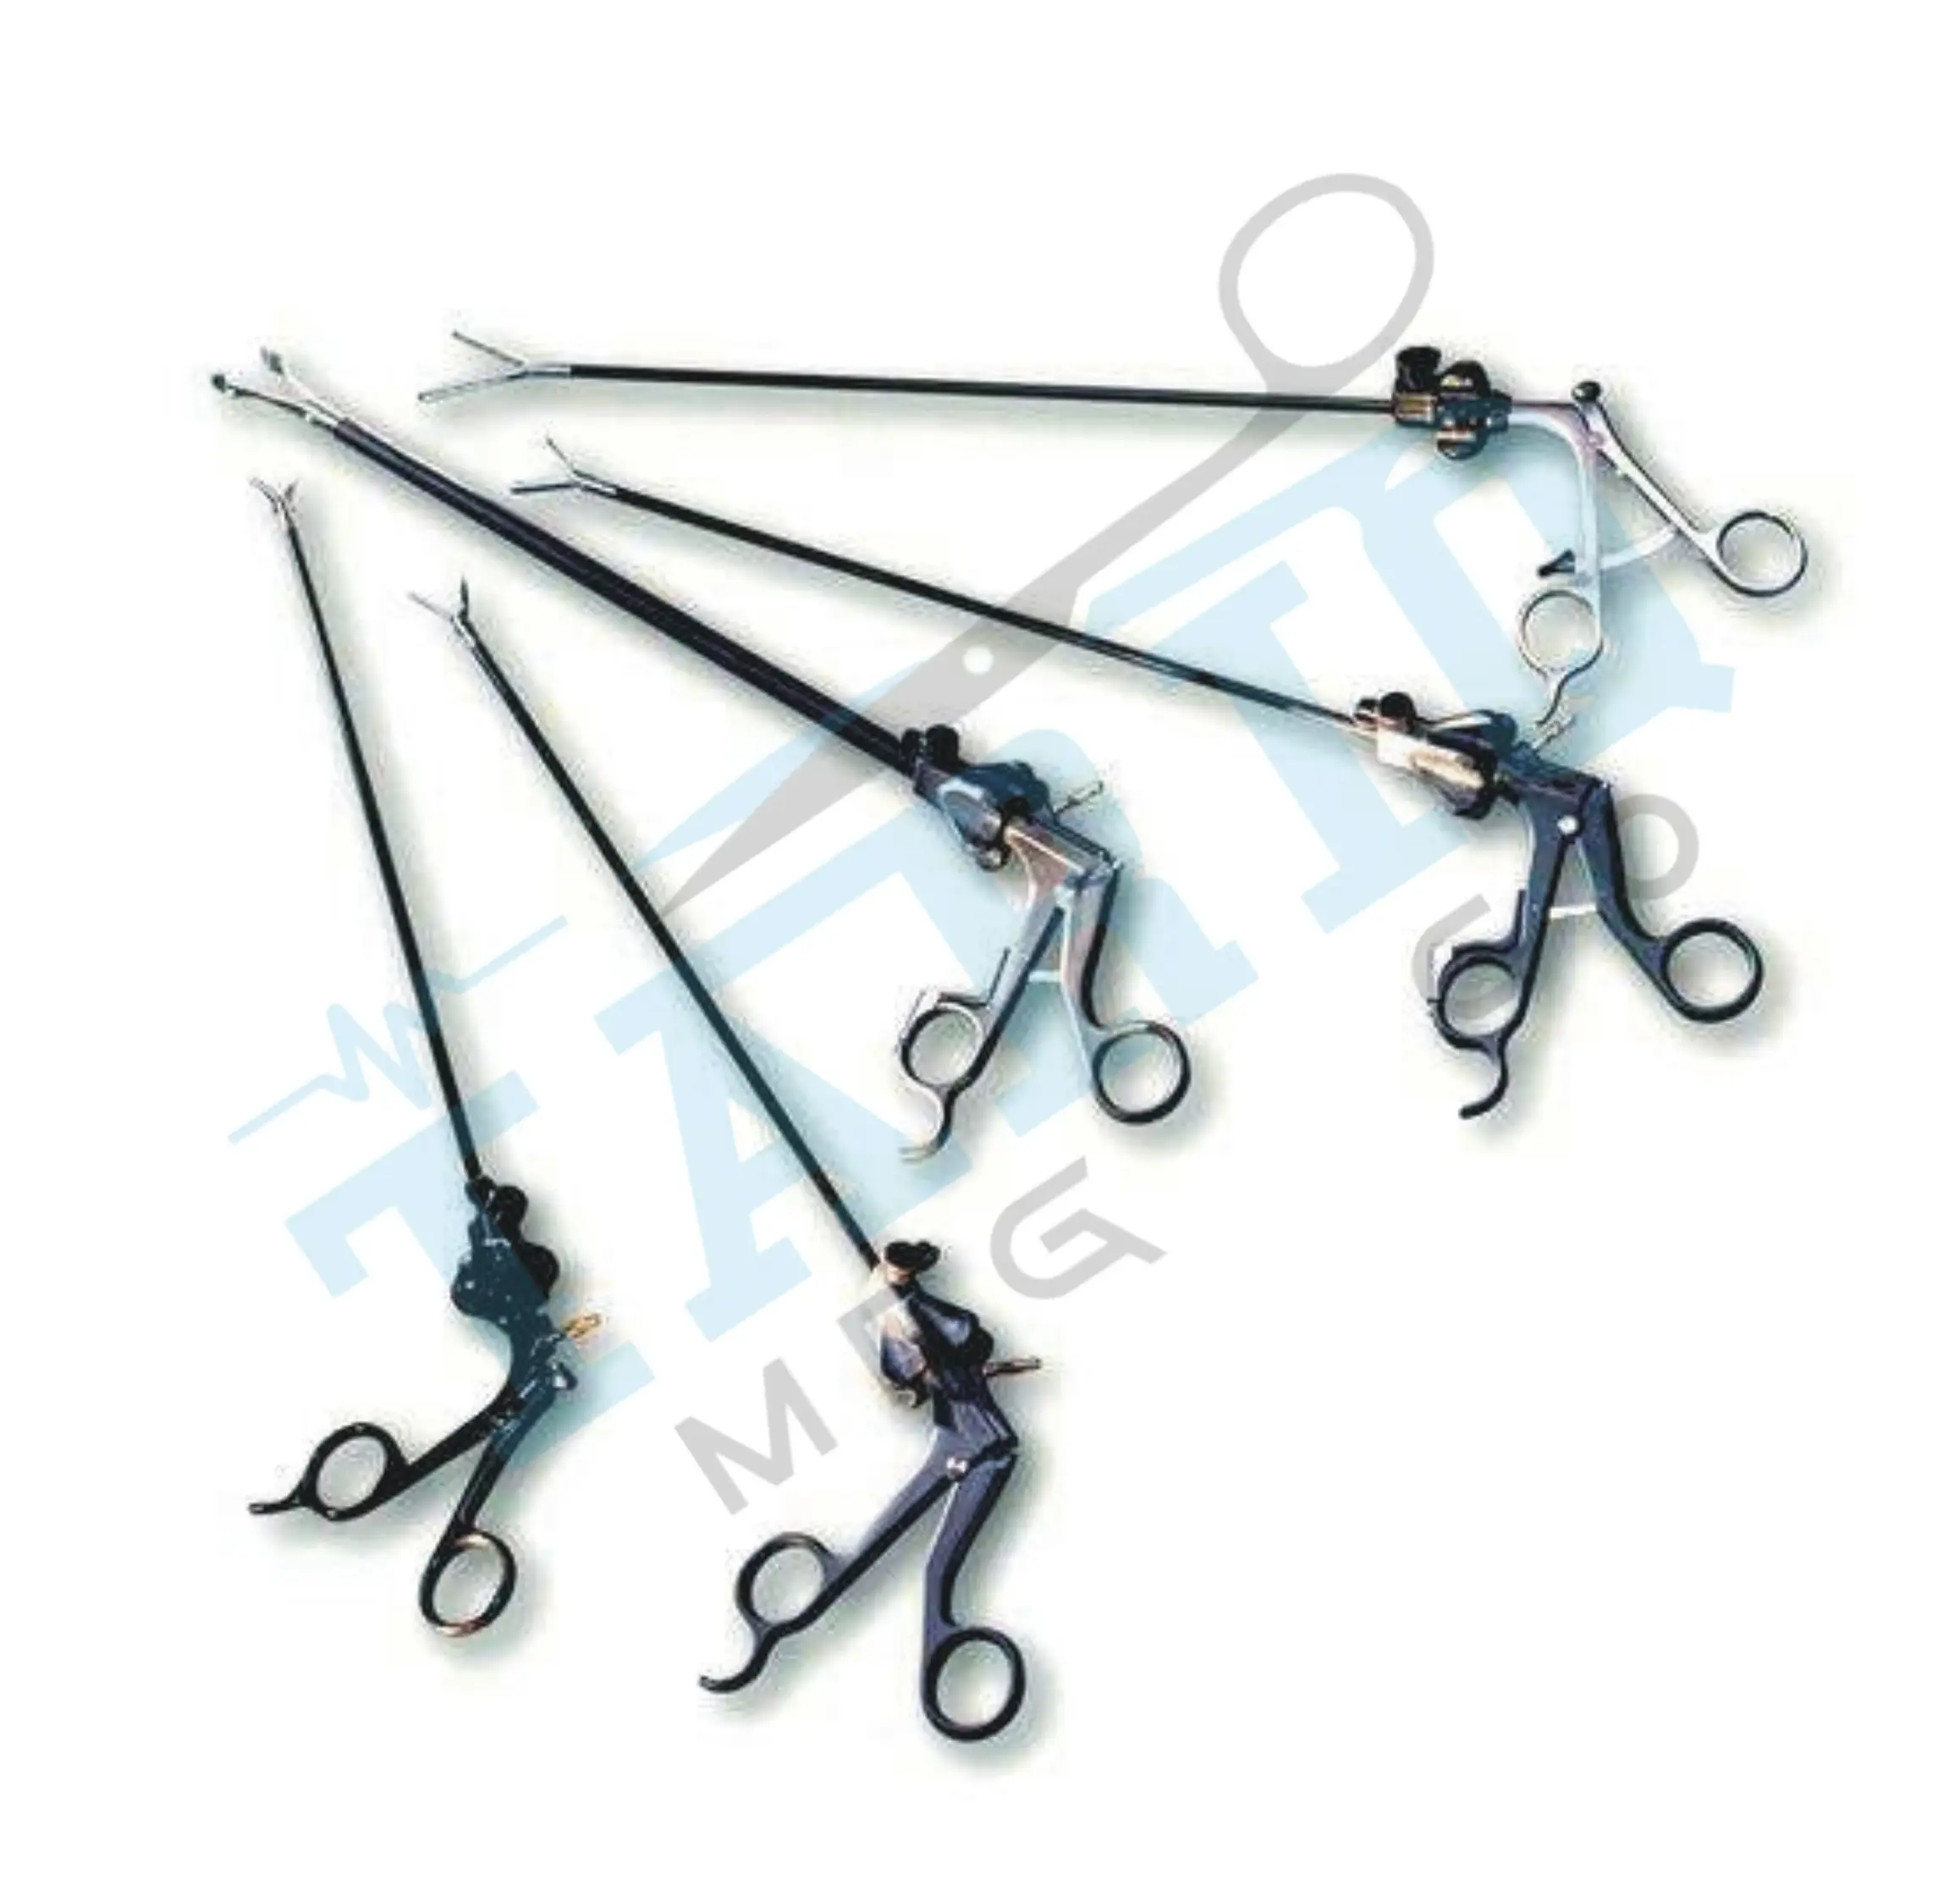 Top quality Laparoscopic Instruments New Arrival Neurosurgical Surgical Instrument Wholesale Best Selling Surgical Equipment